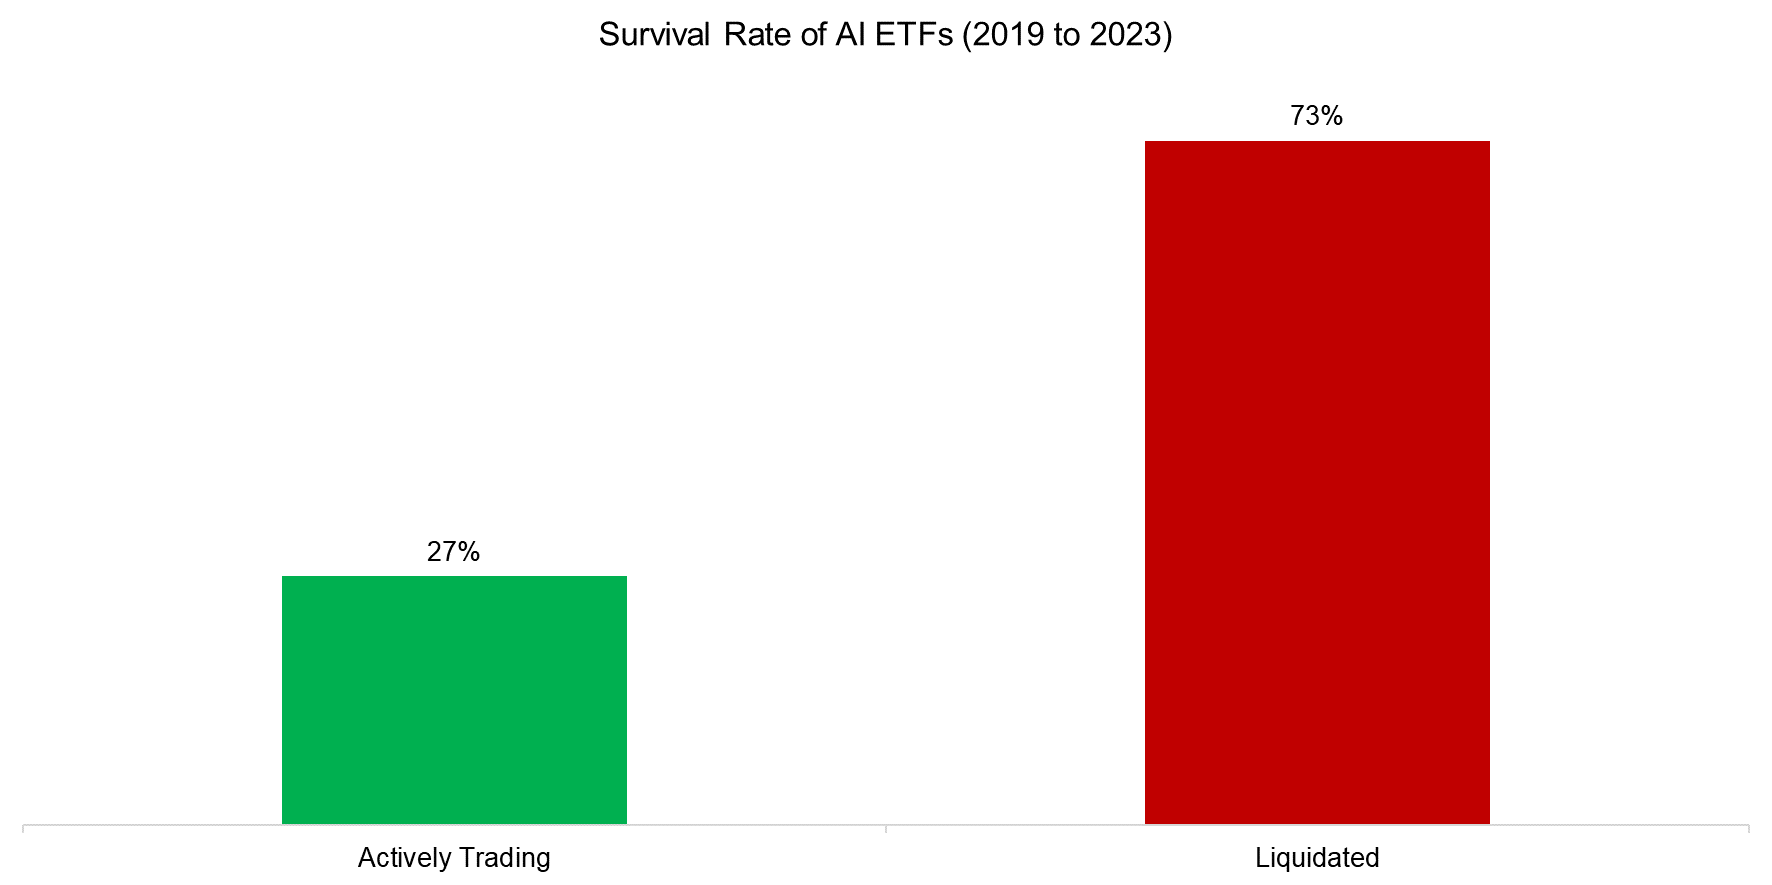 Survival Rate of AI ETFs (2019 to 2023)